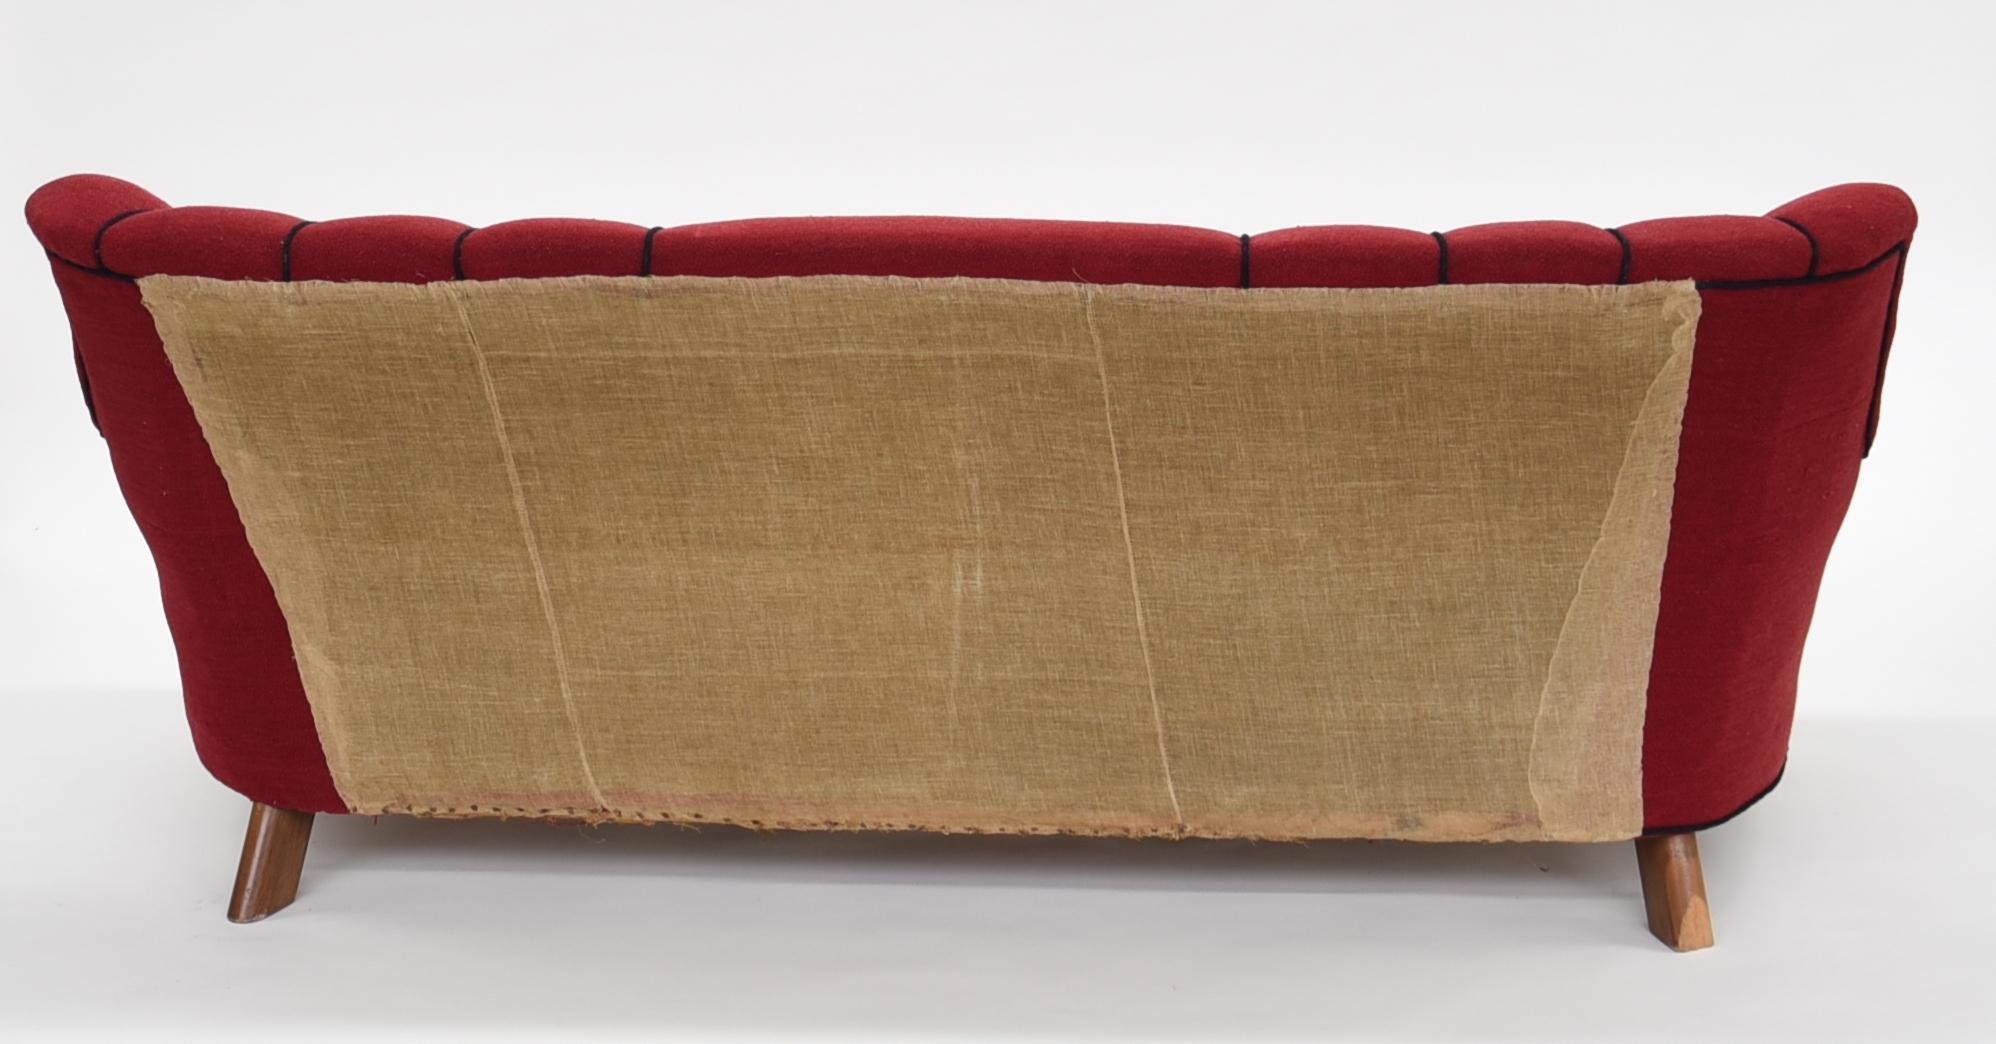 Fritz Hansen Three-Seat Sofa Model 1669a Red 3-Seat Couch 1940s Midcentury 1